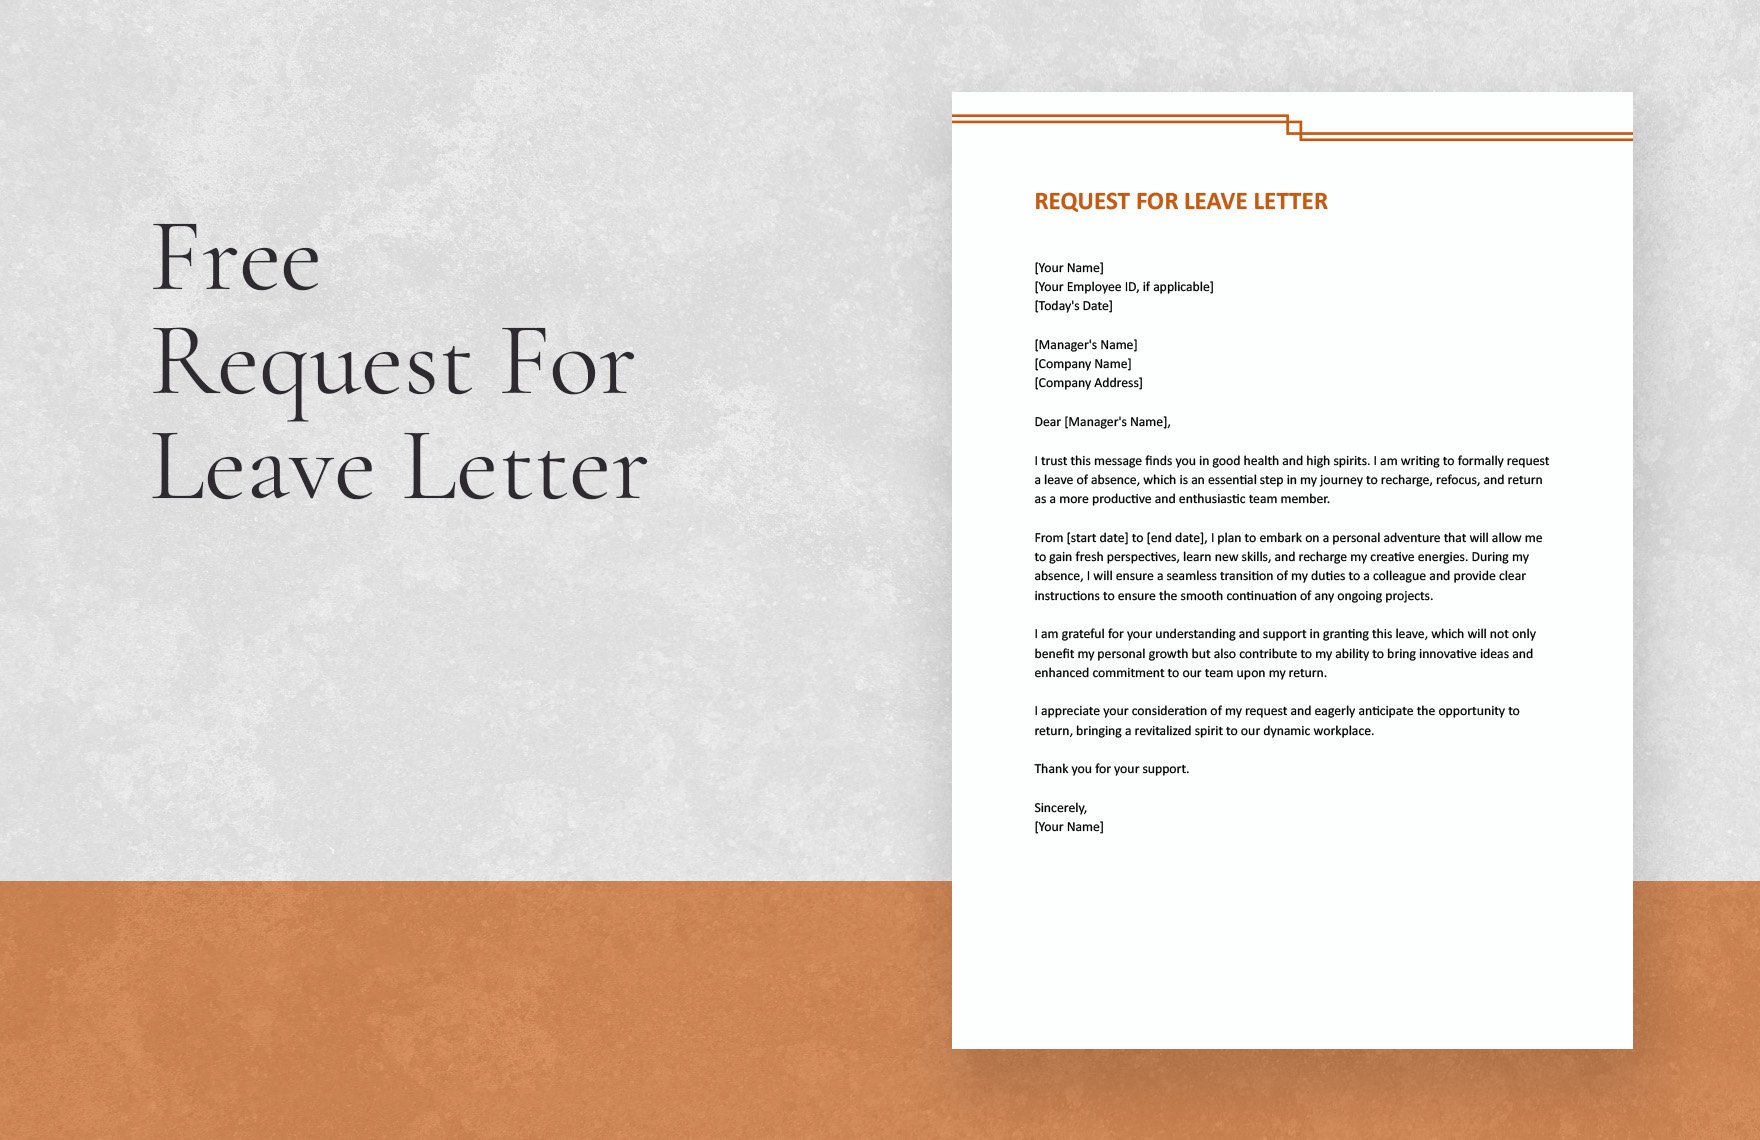 Request For Leave Letter